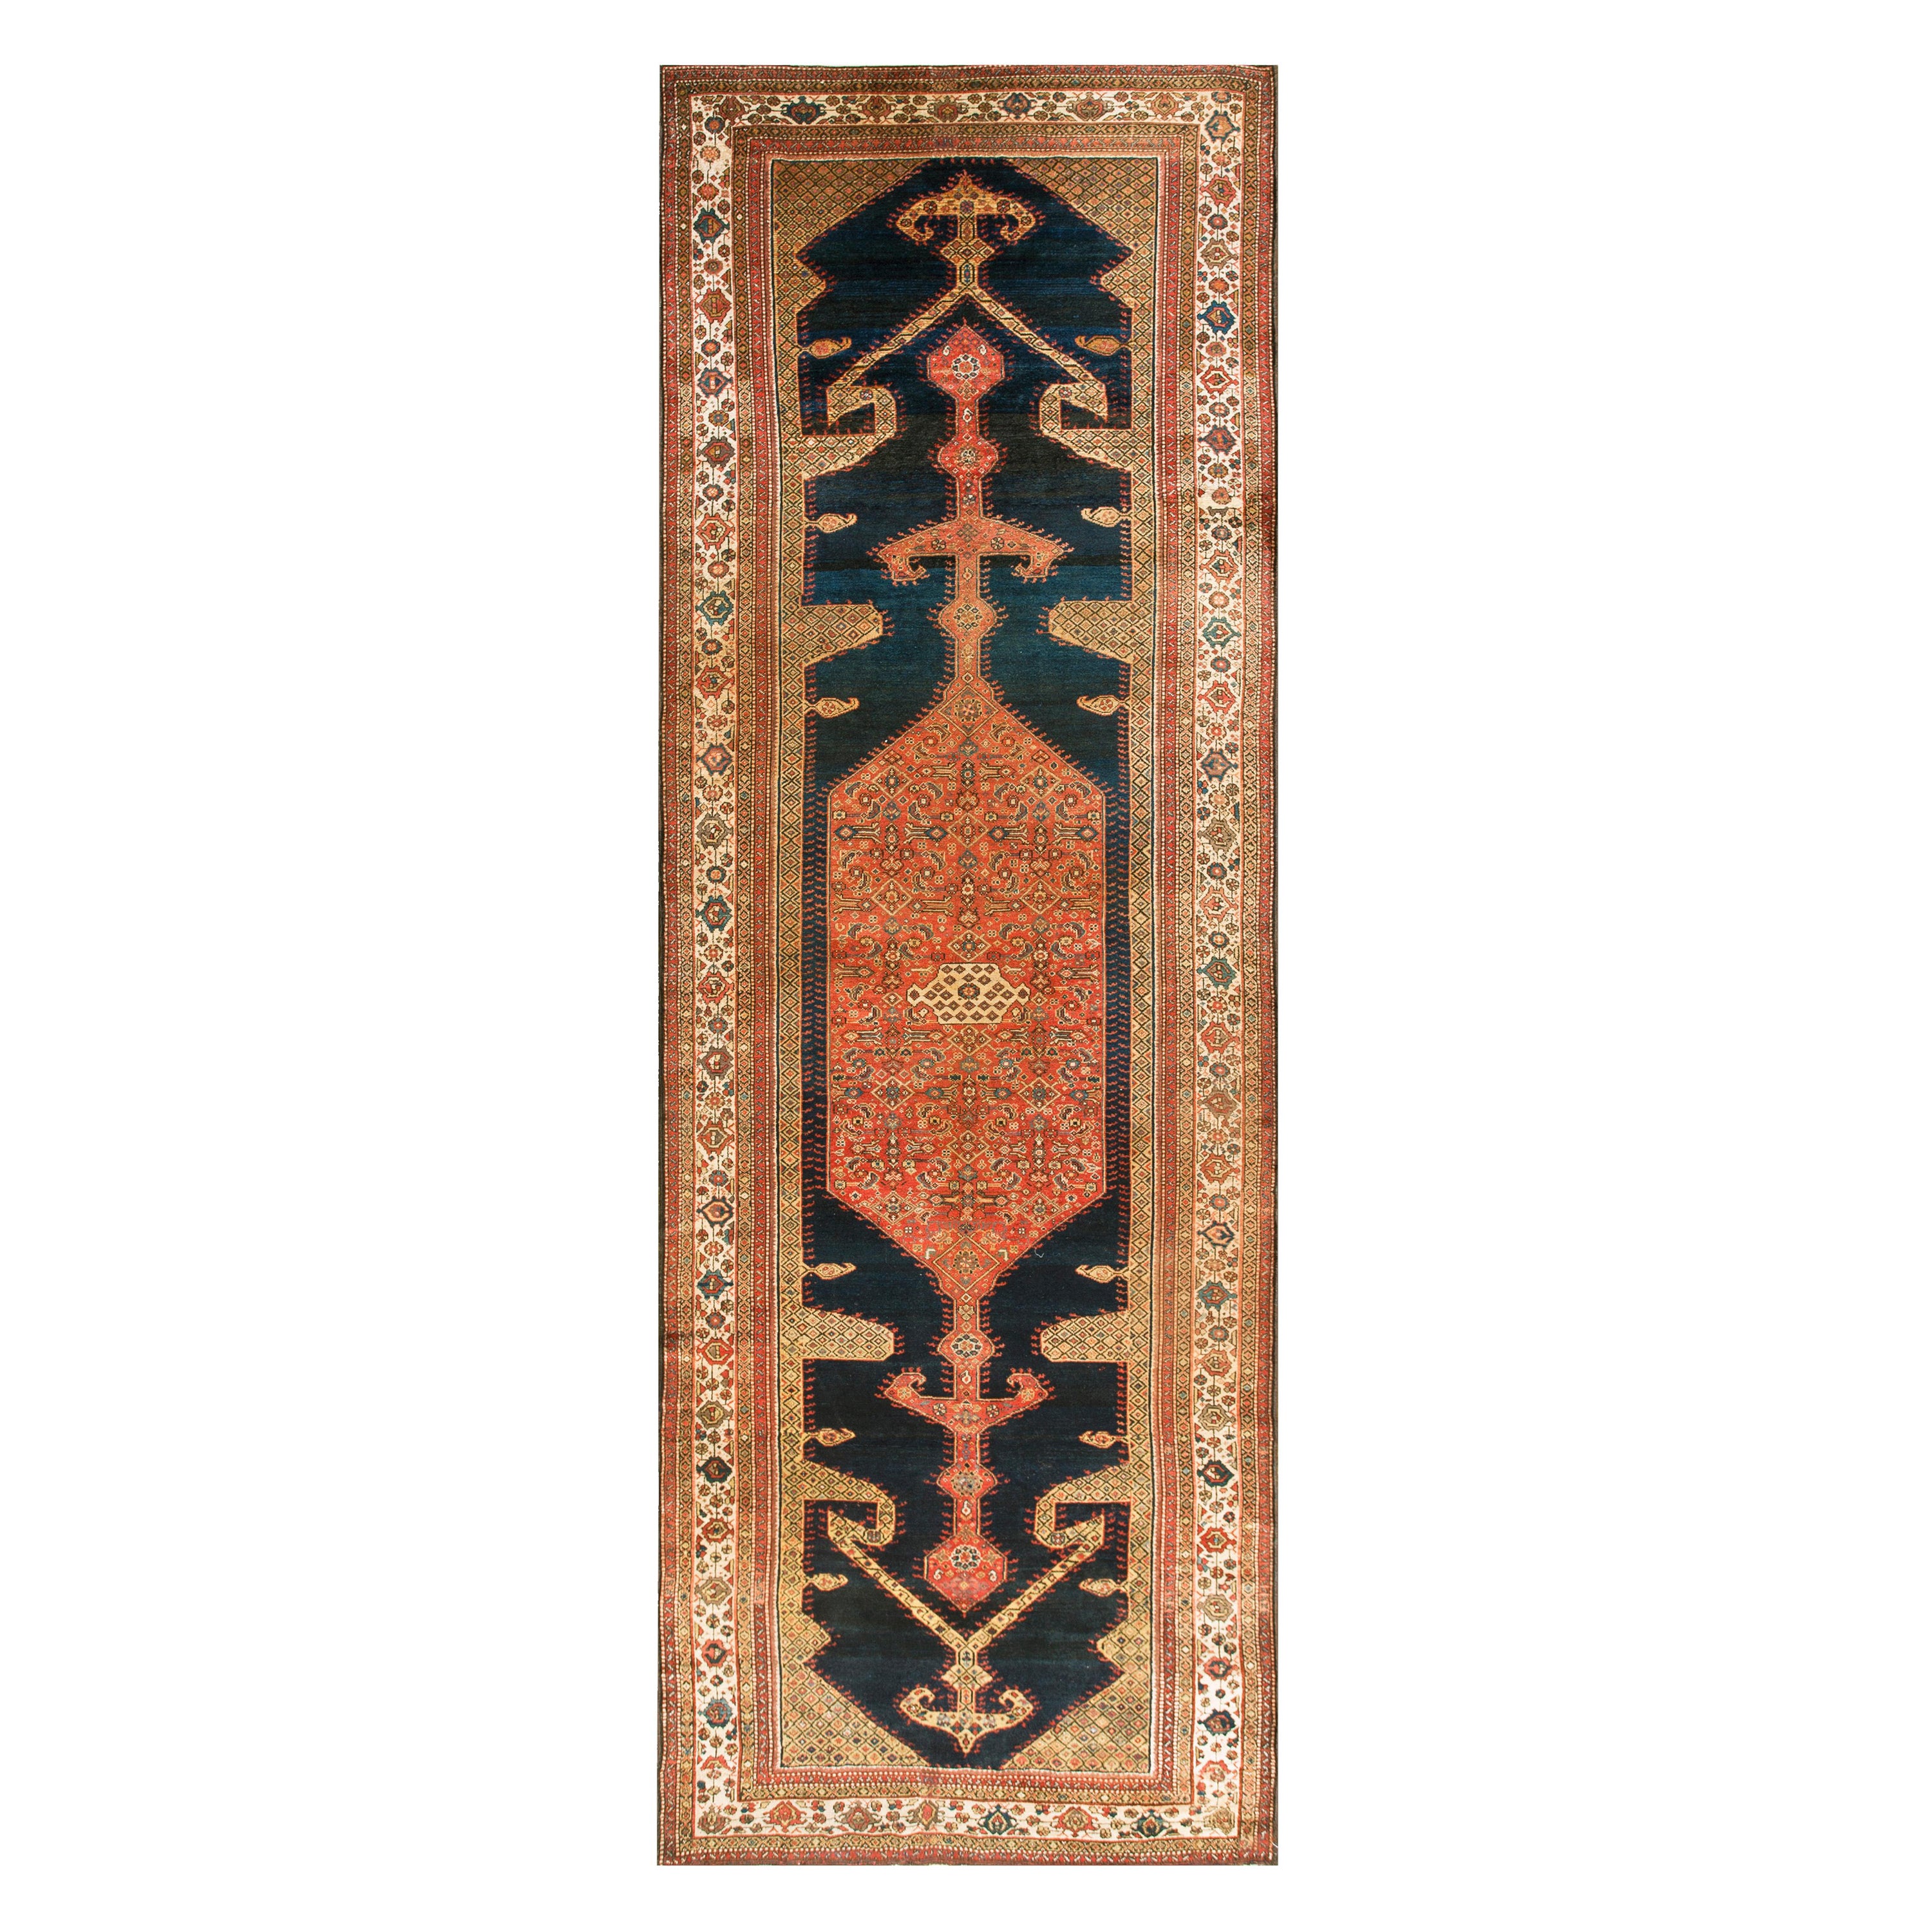 Late 19th Century Persian Malayer Carpet ( 5' 8" x 16' - 172 x 487 cm ) For Sale